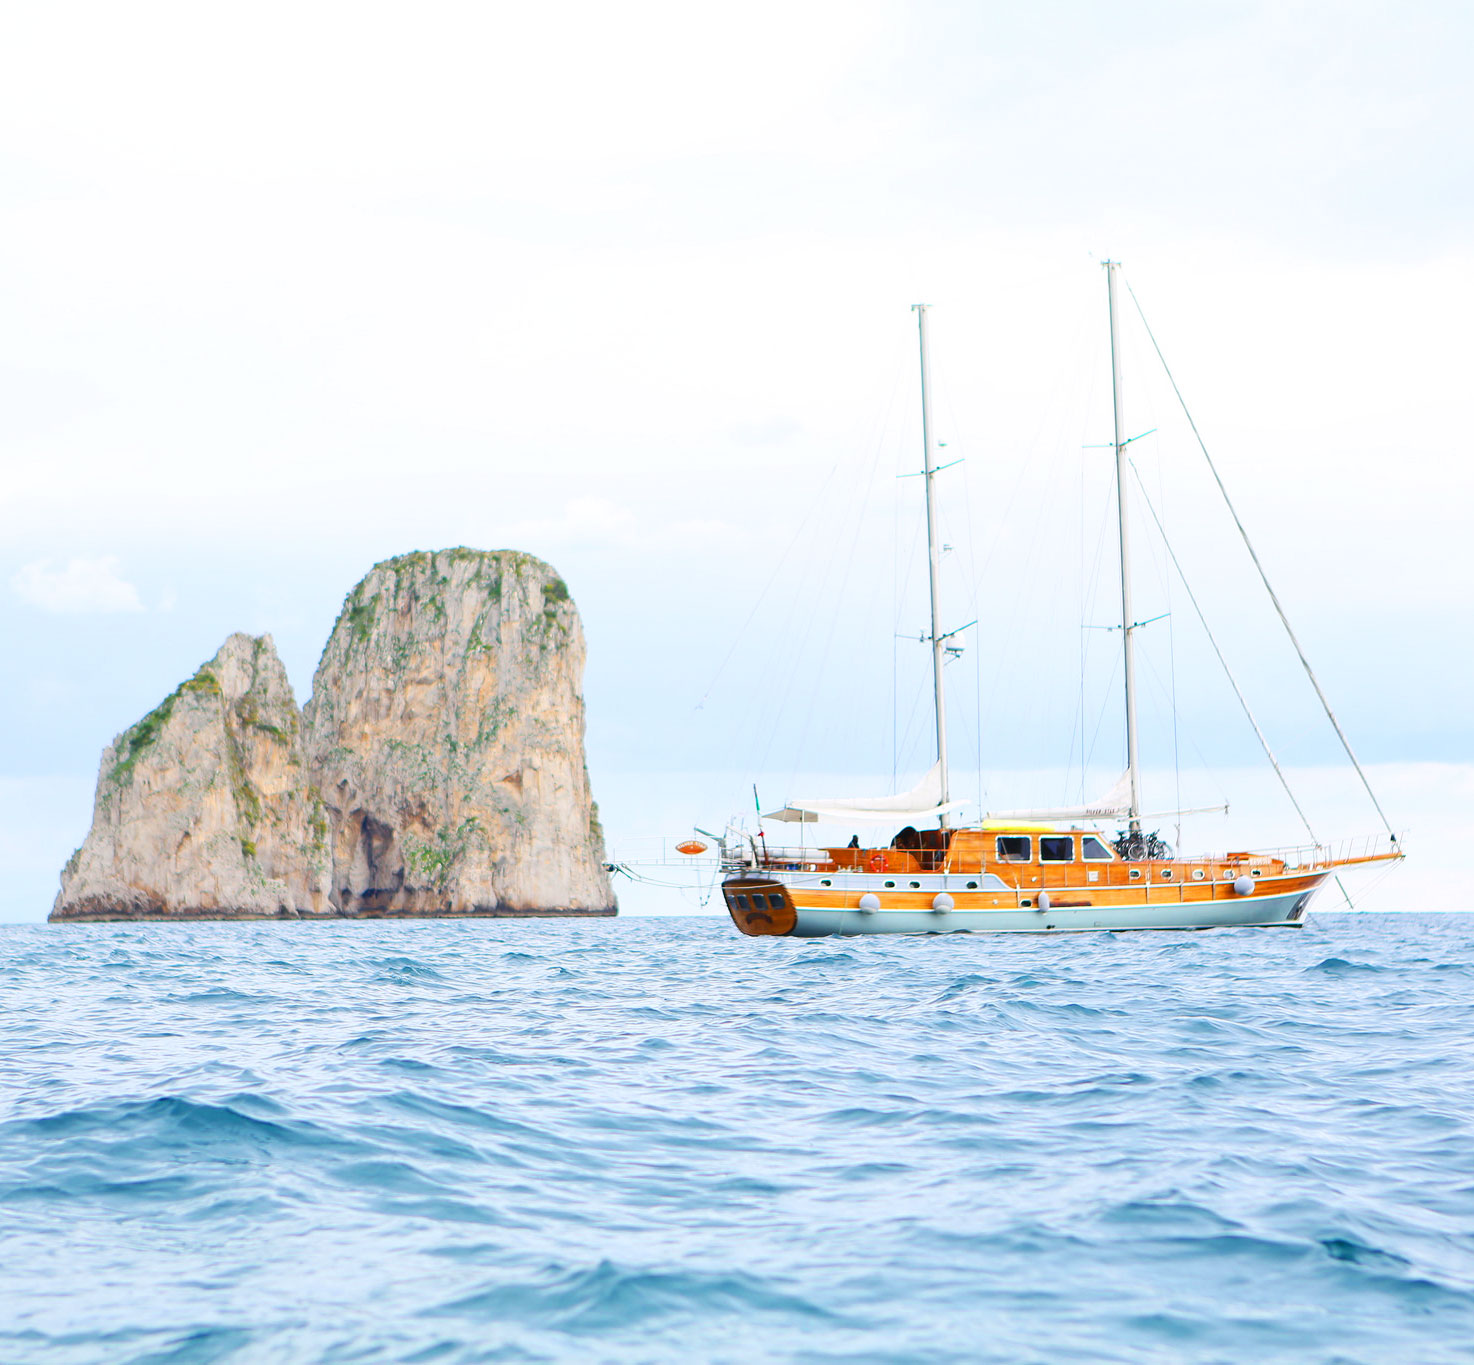 capri guide; guide to capri by top travel blogger kelly golightly